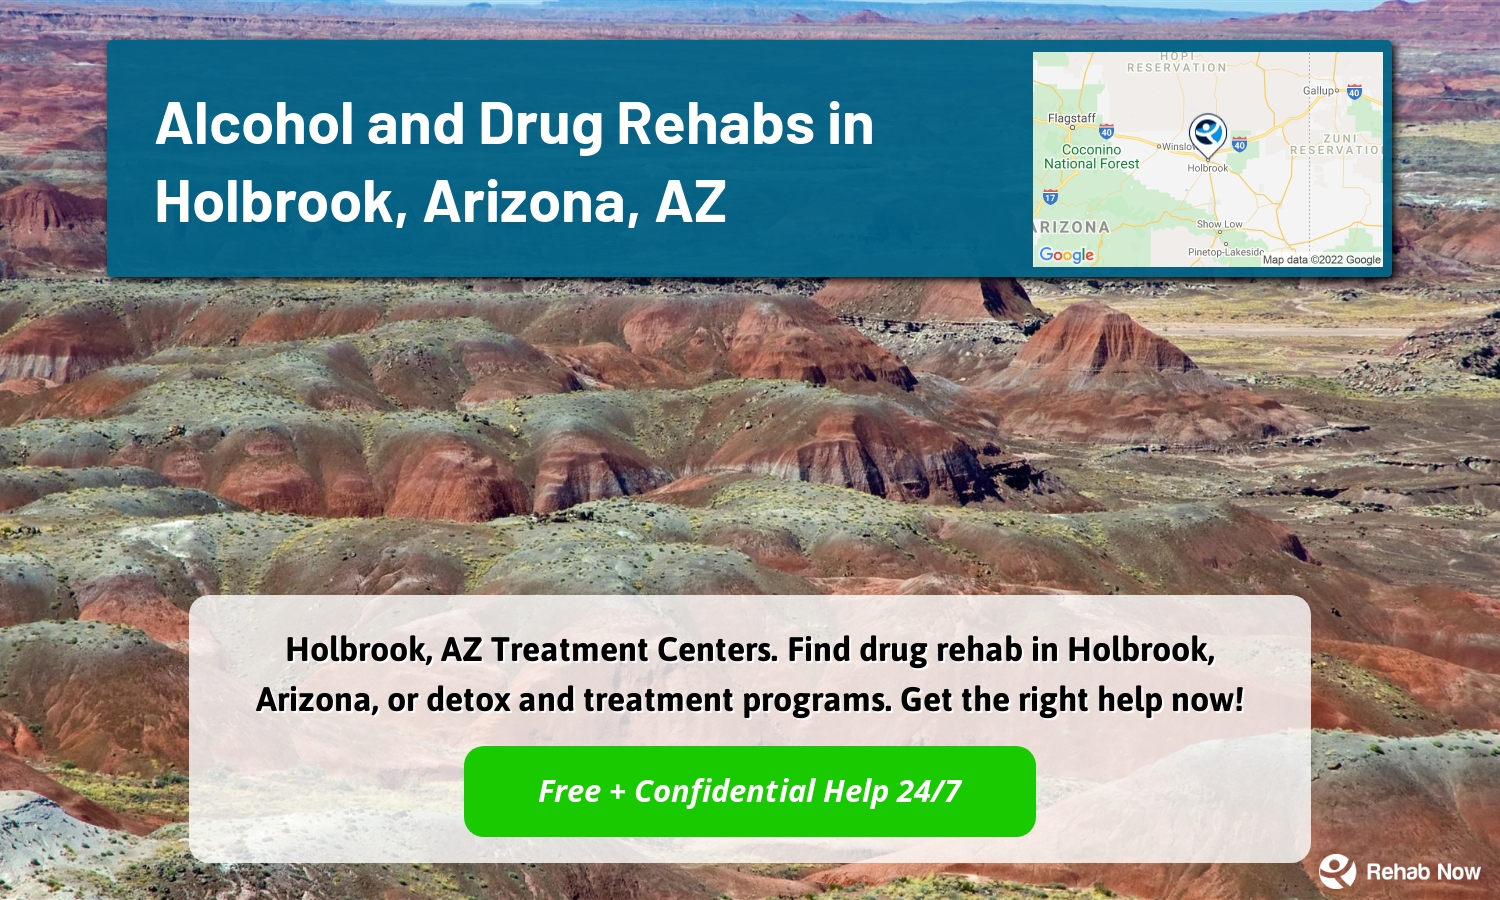 Holbrook, AZ Treatment Centers. Find drug rehab in Holbrook, Arizona, or detox and treatment programs. Get the right help now!